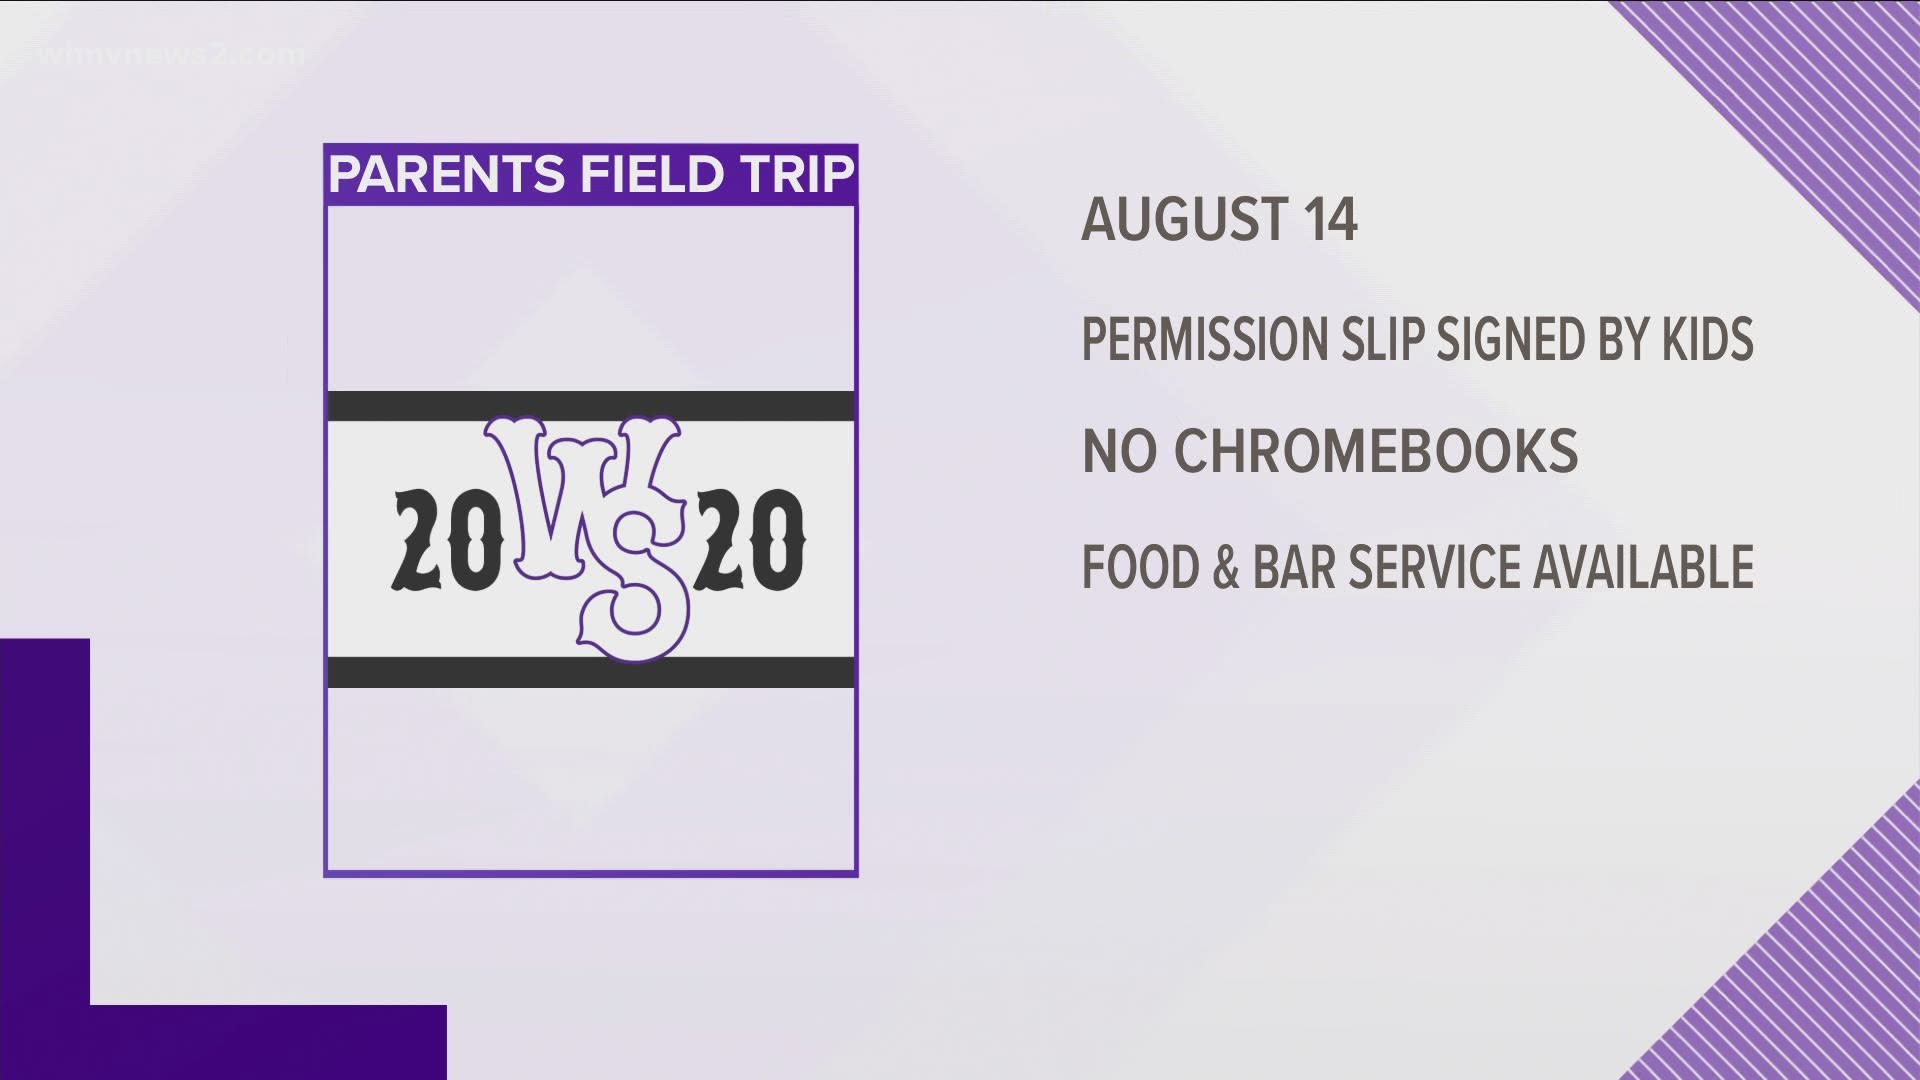 The field trip is a night out for parents, but they need to have a permission slip signed by their kids to attend.